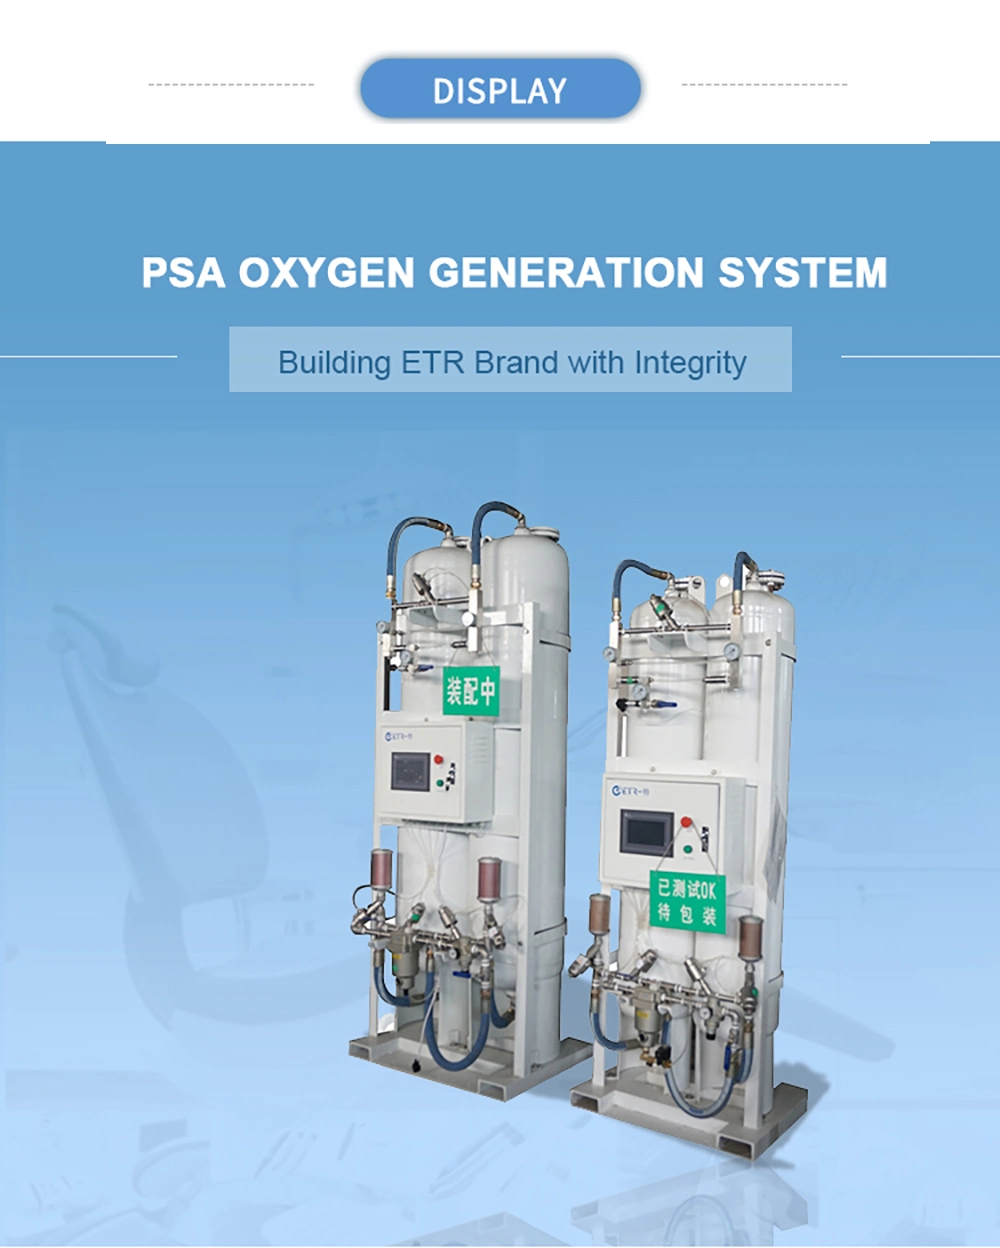 Cheap Psa Oxygen Generator Portable Oxygen Concentrator on Sale Made in China